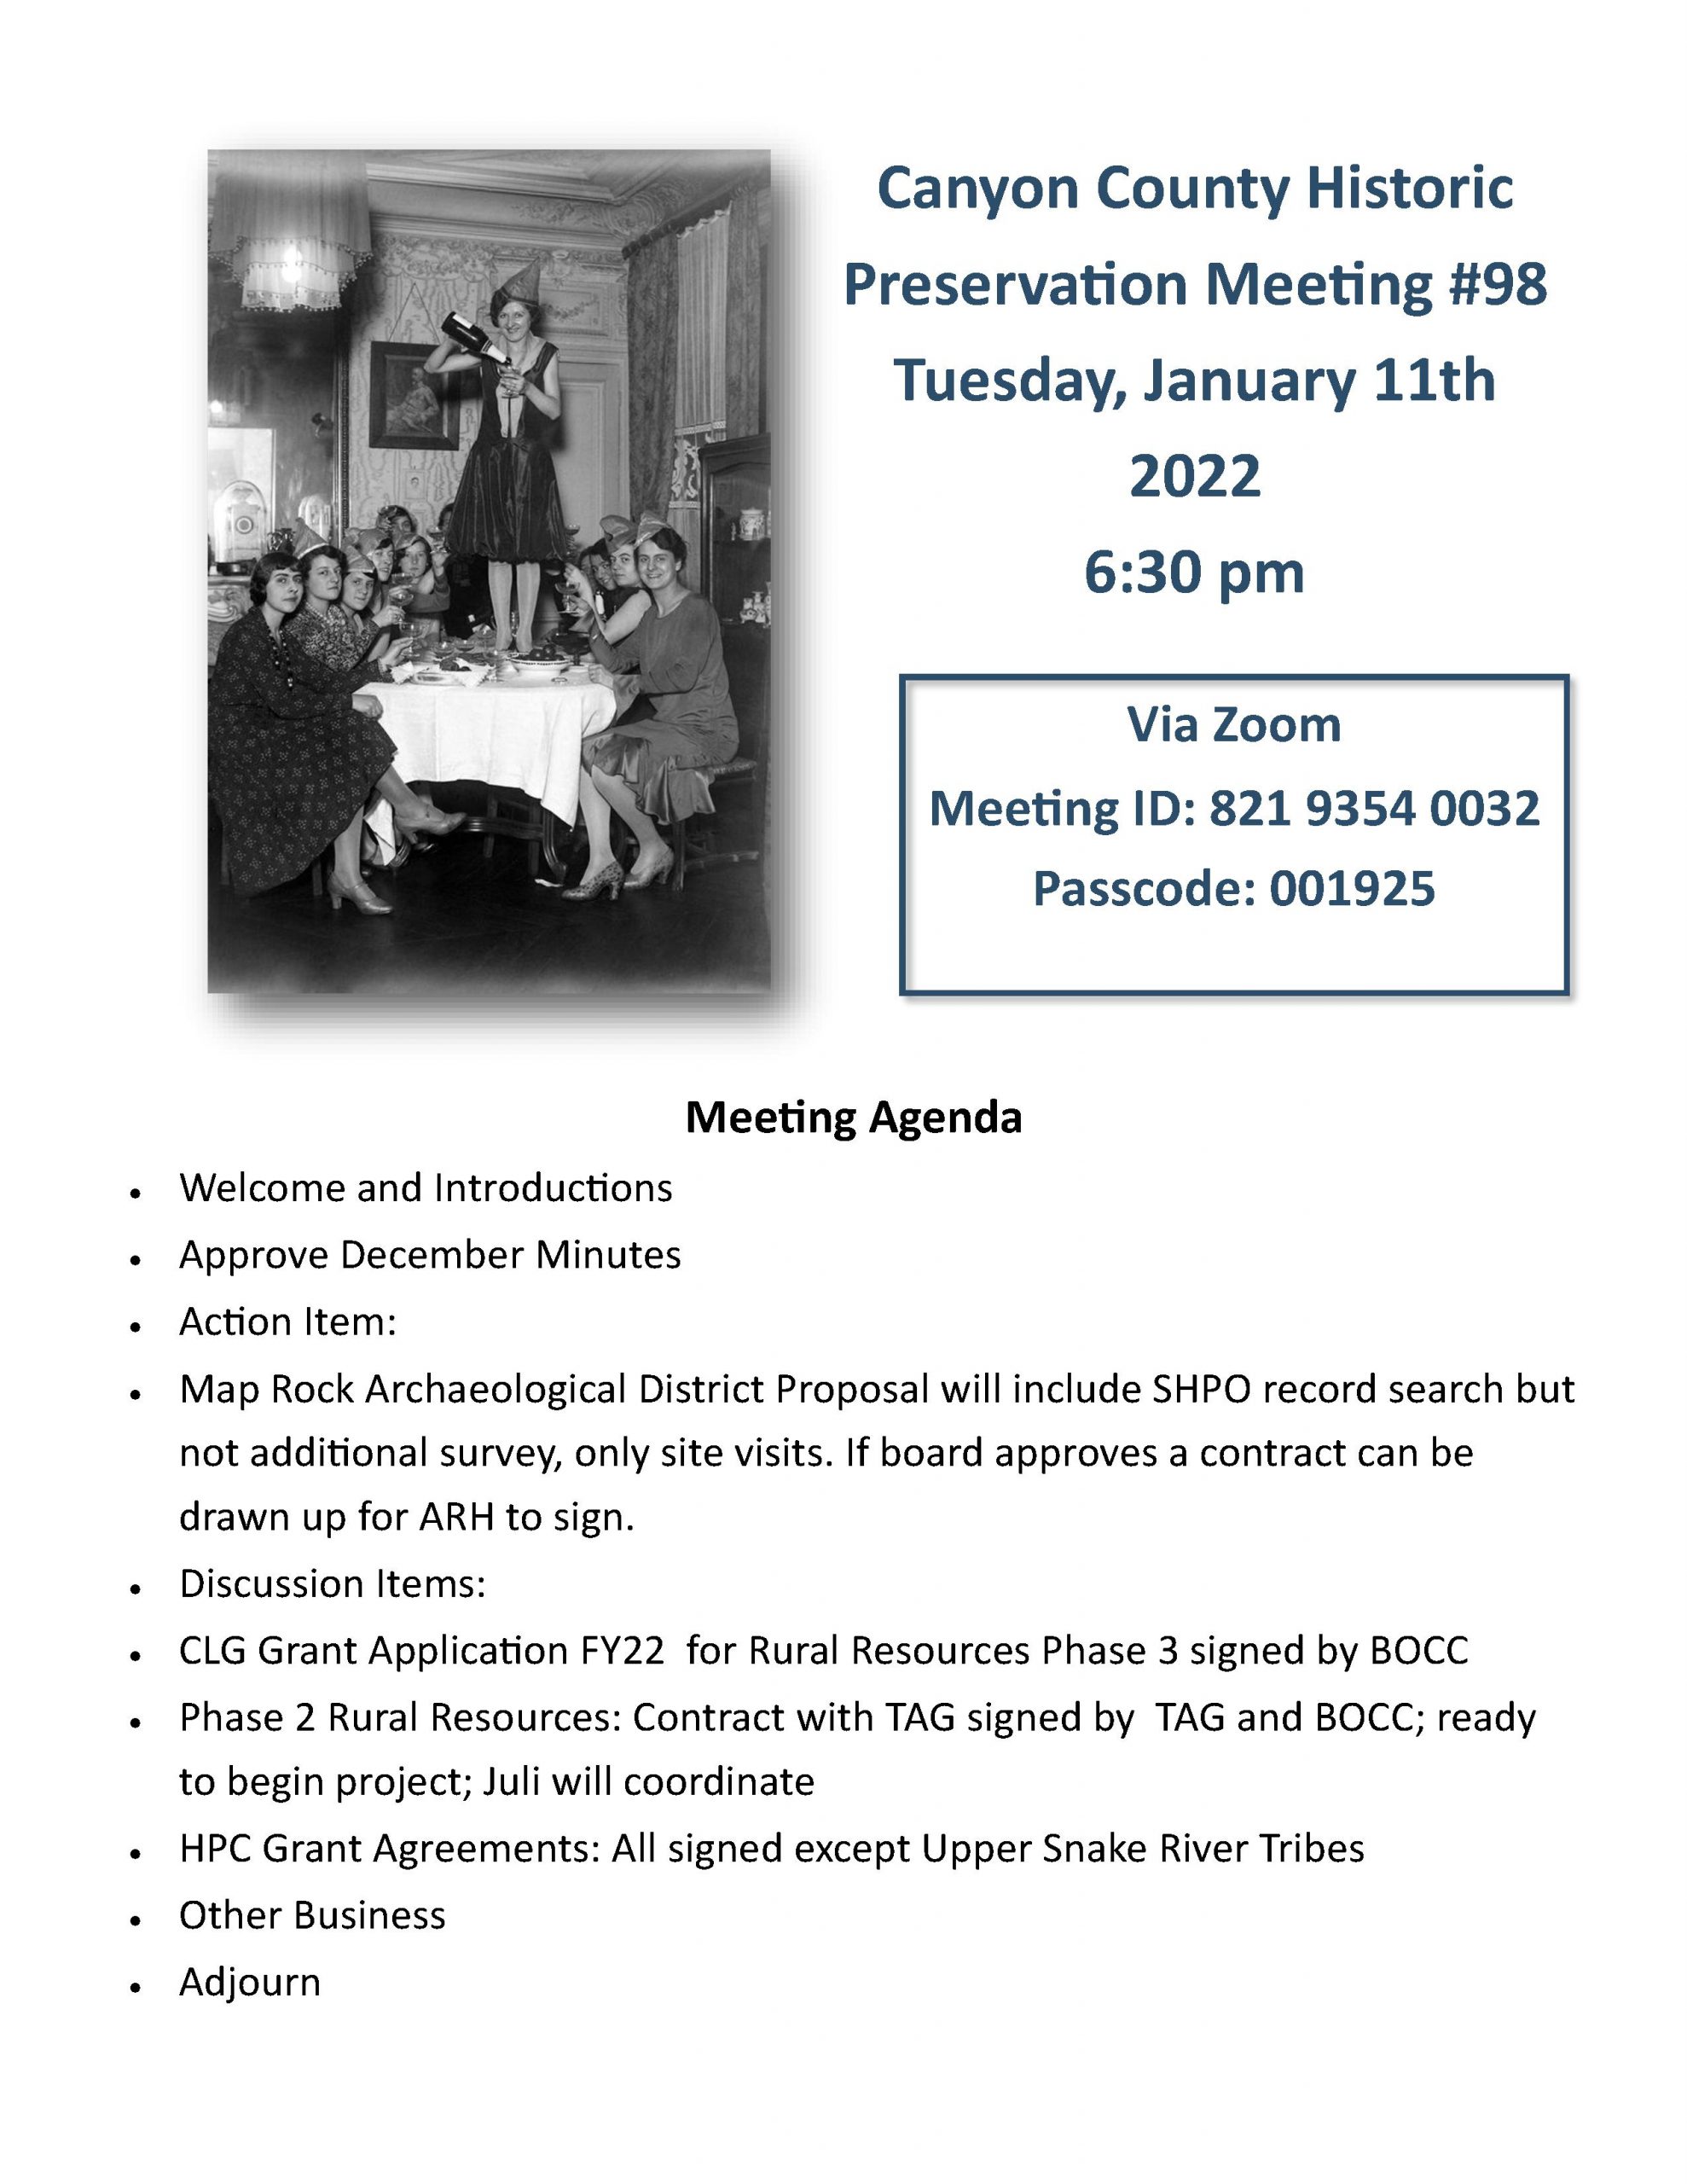 Flyer for HPC meeting on Tuesday, January 11, 2022.